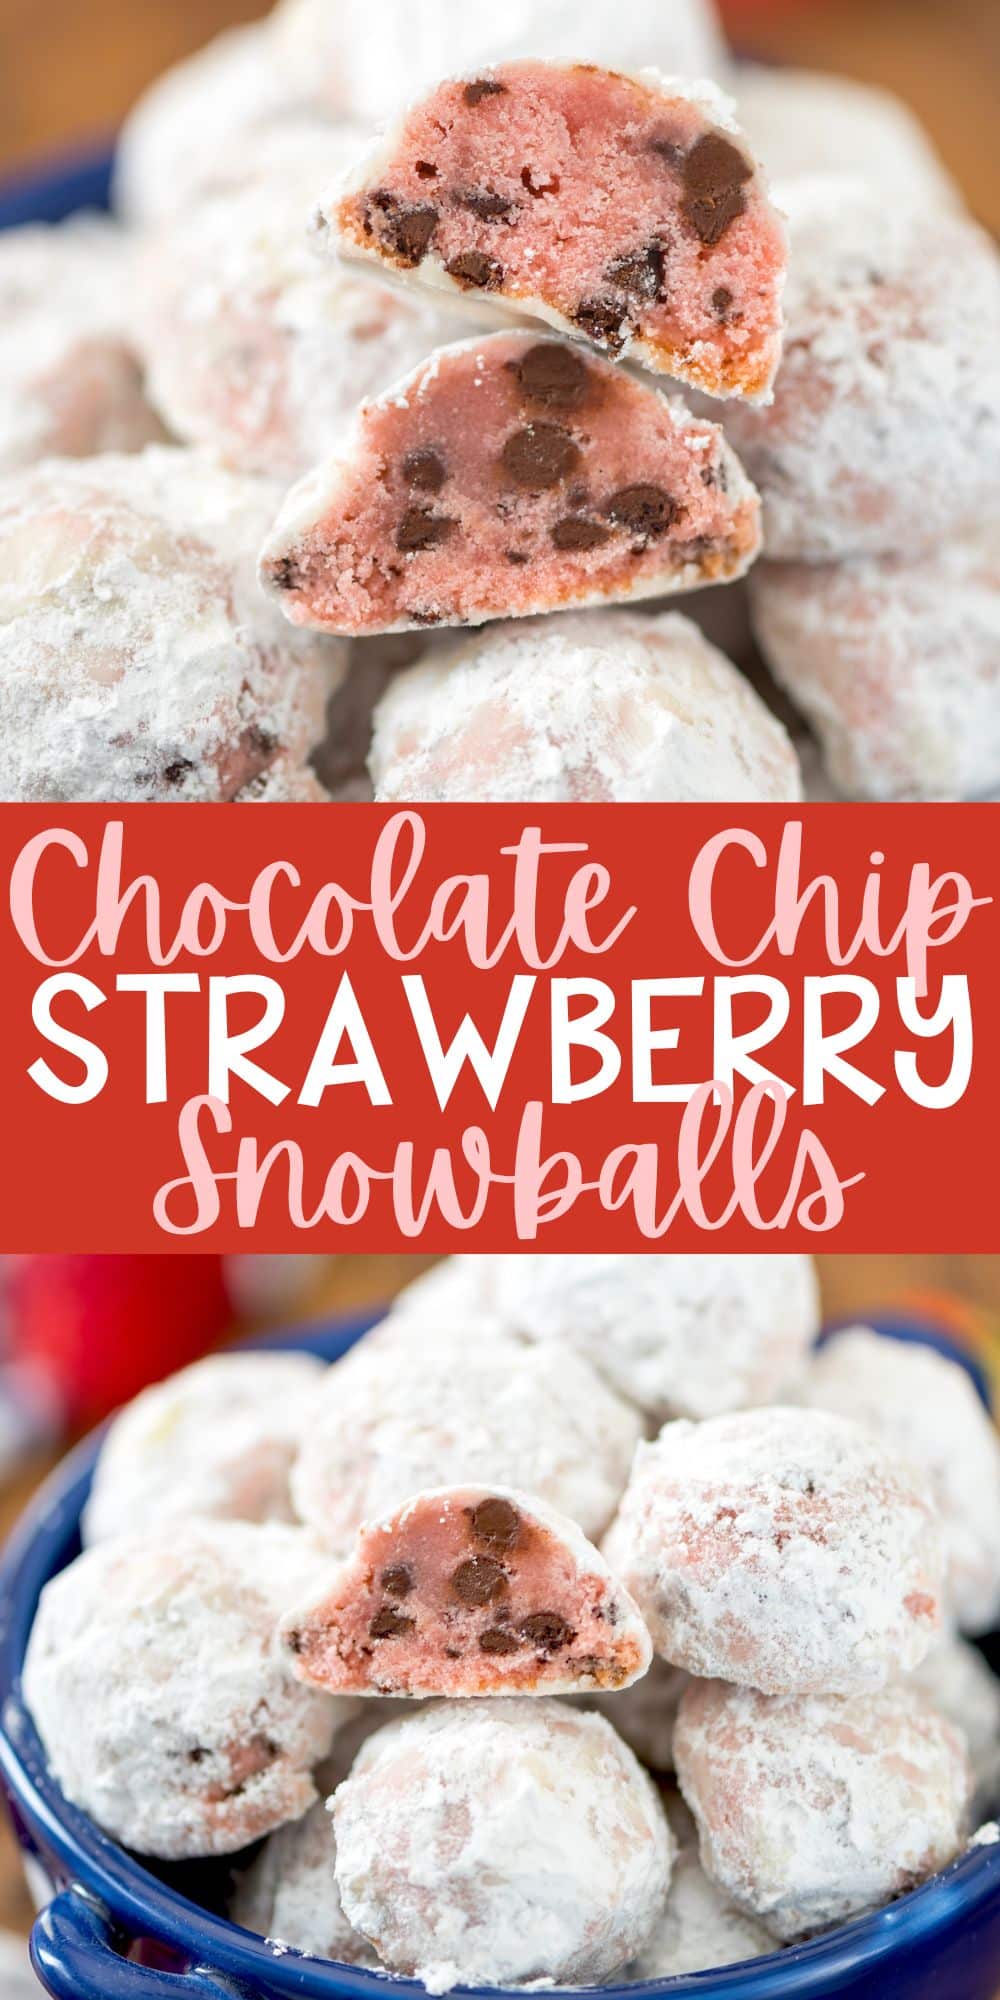 two photos of strawberry snowballs cut in half with chocolate chips baked in with words on the image.